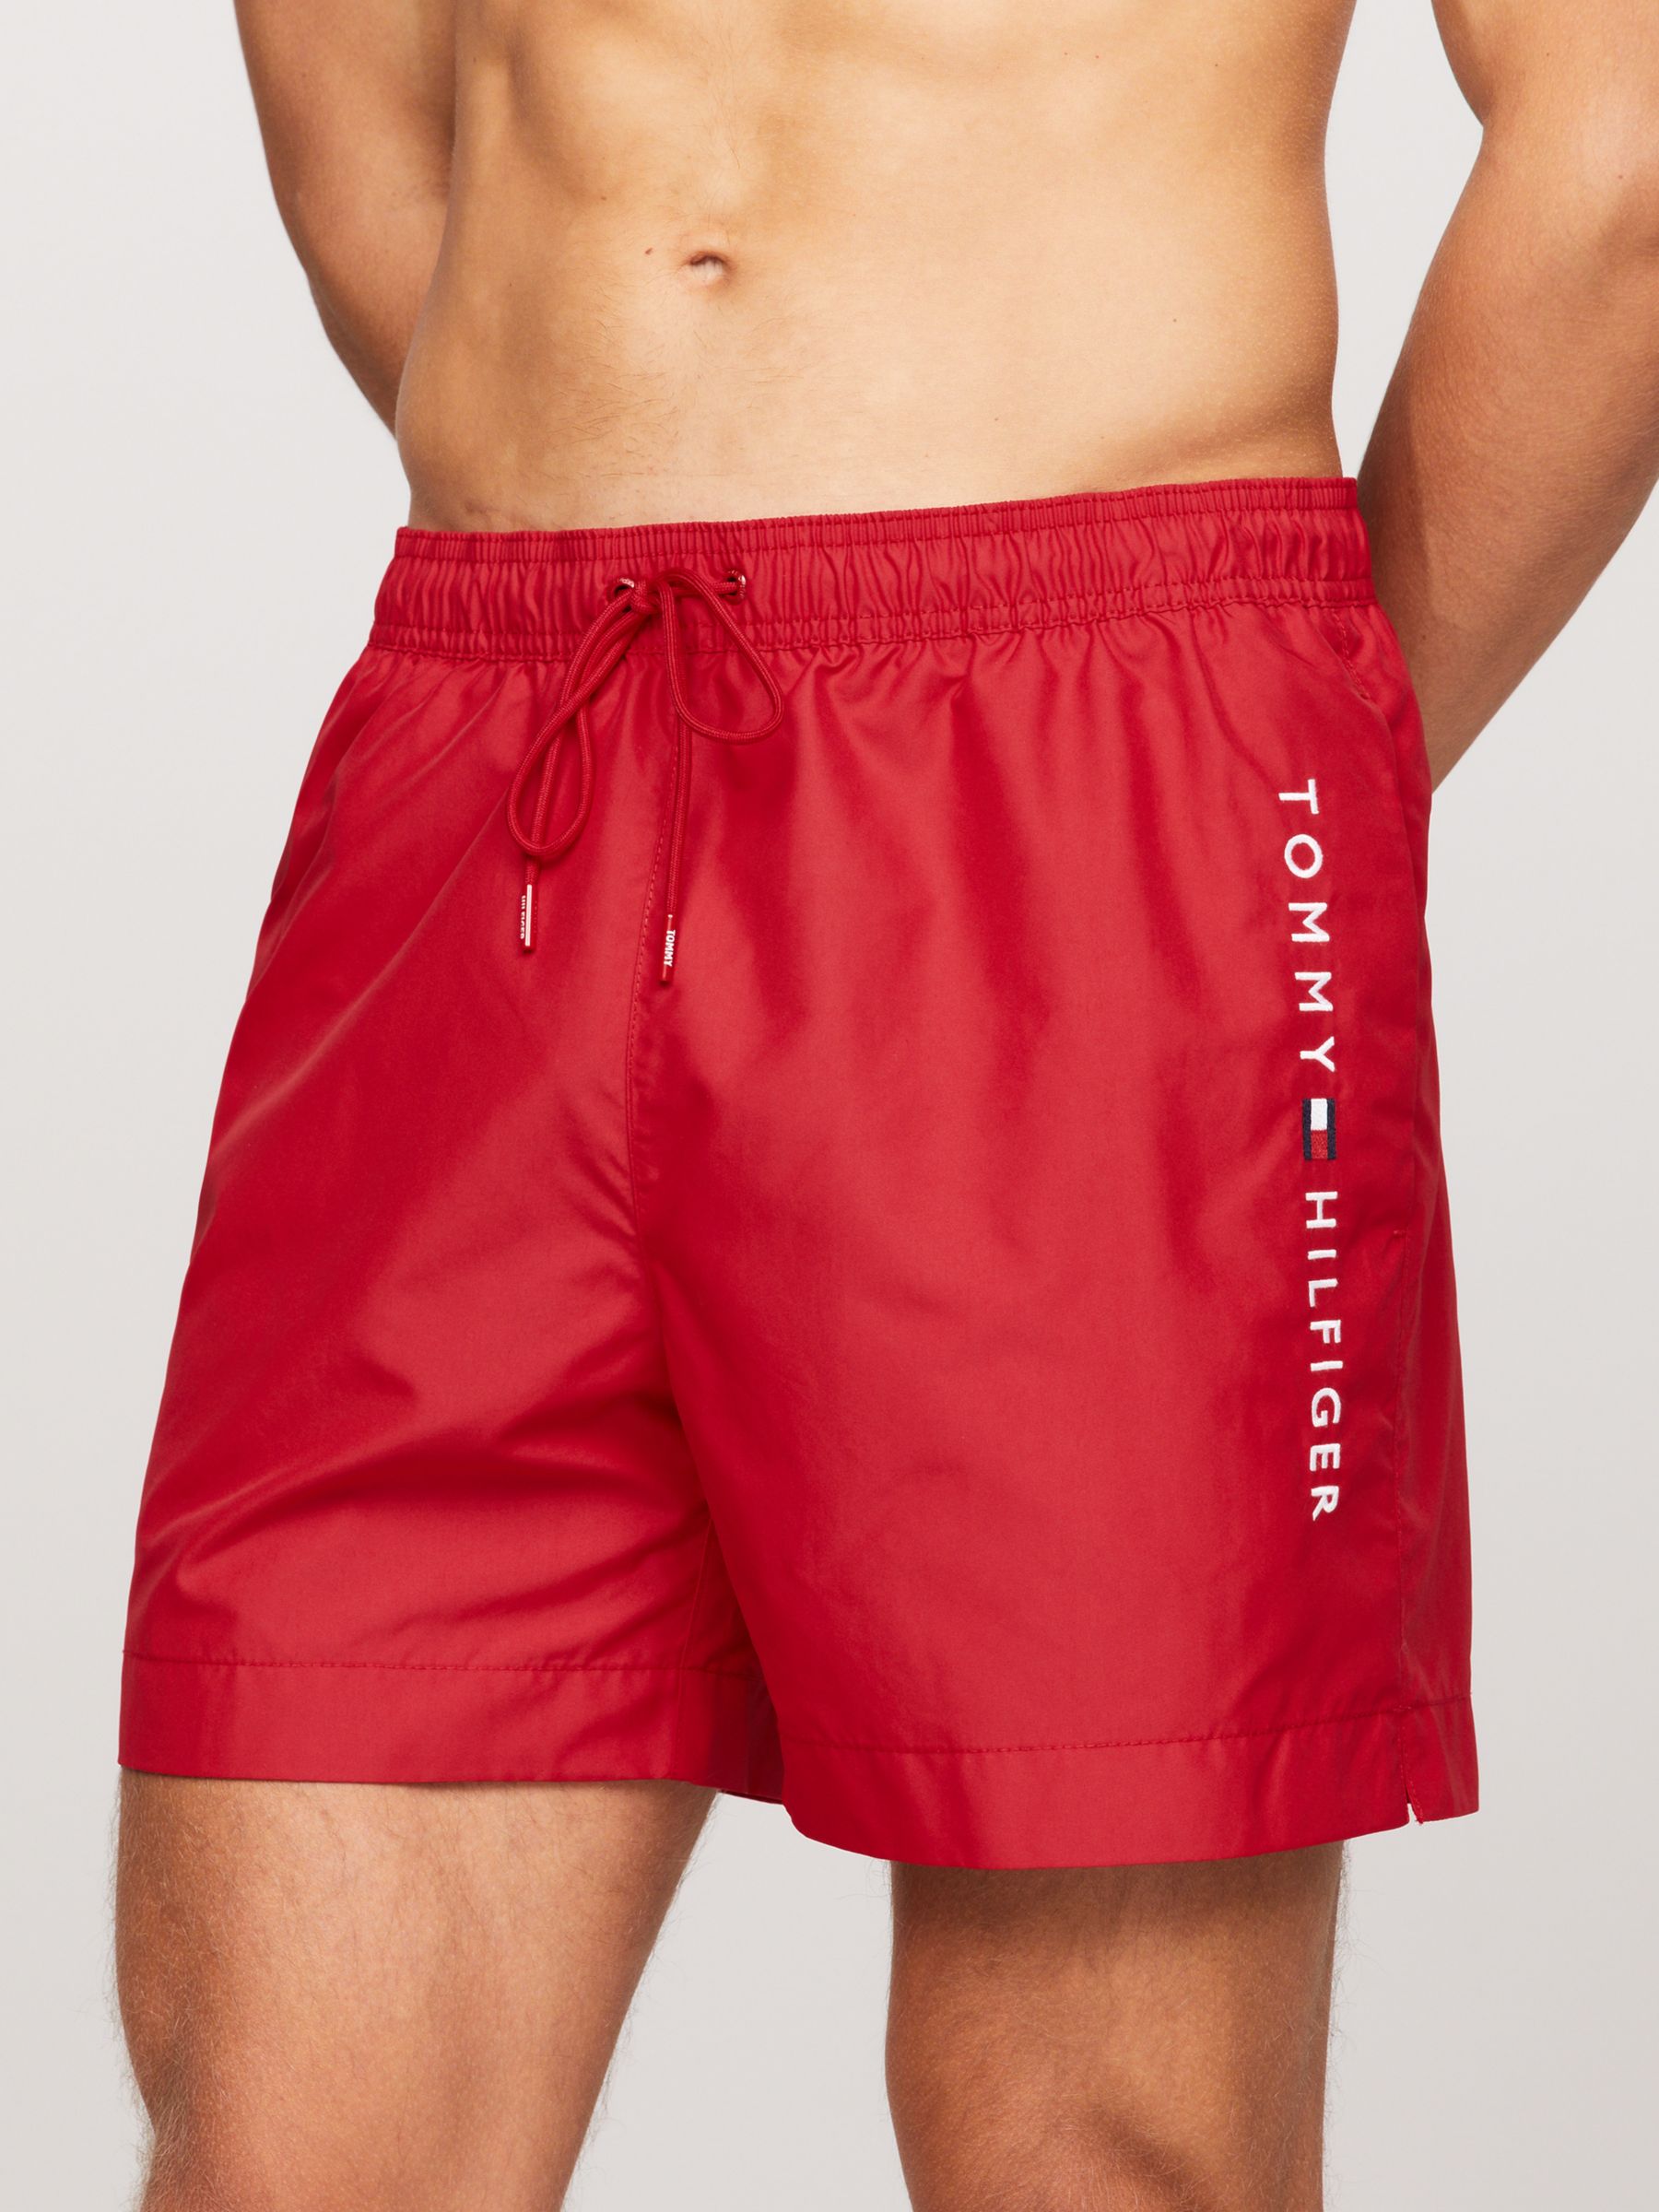 Tommy Hilfiger Side Print Swim Shorts, Primary Red, S